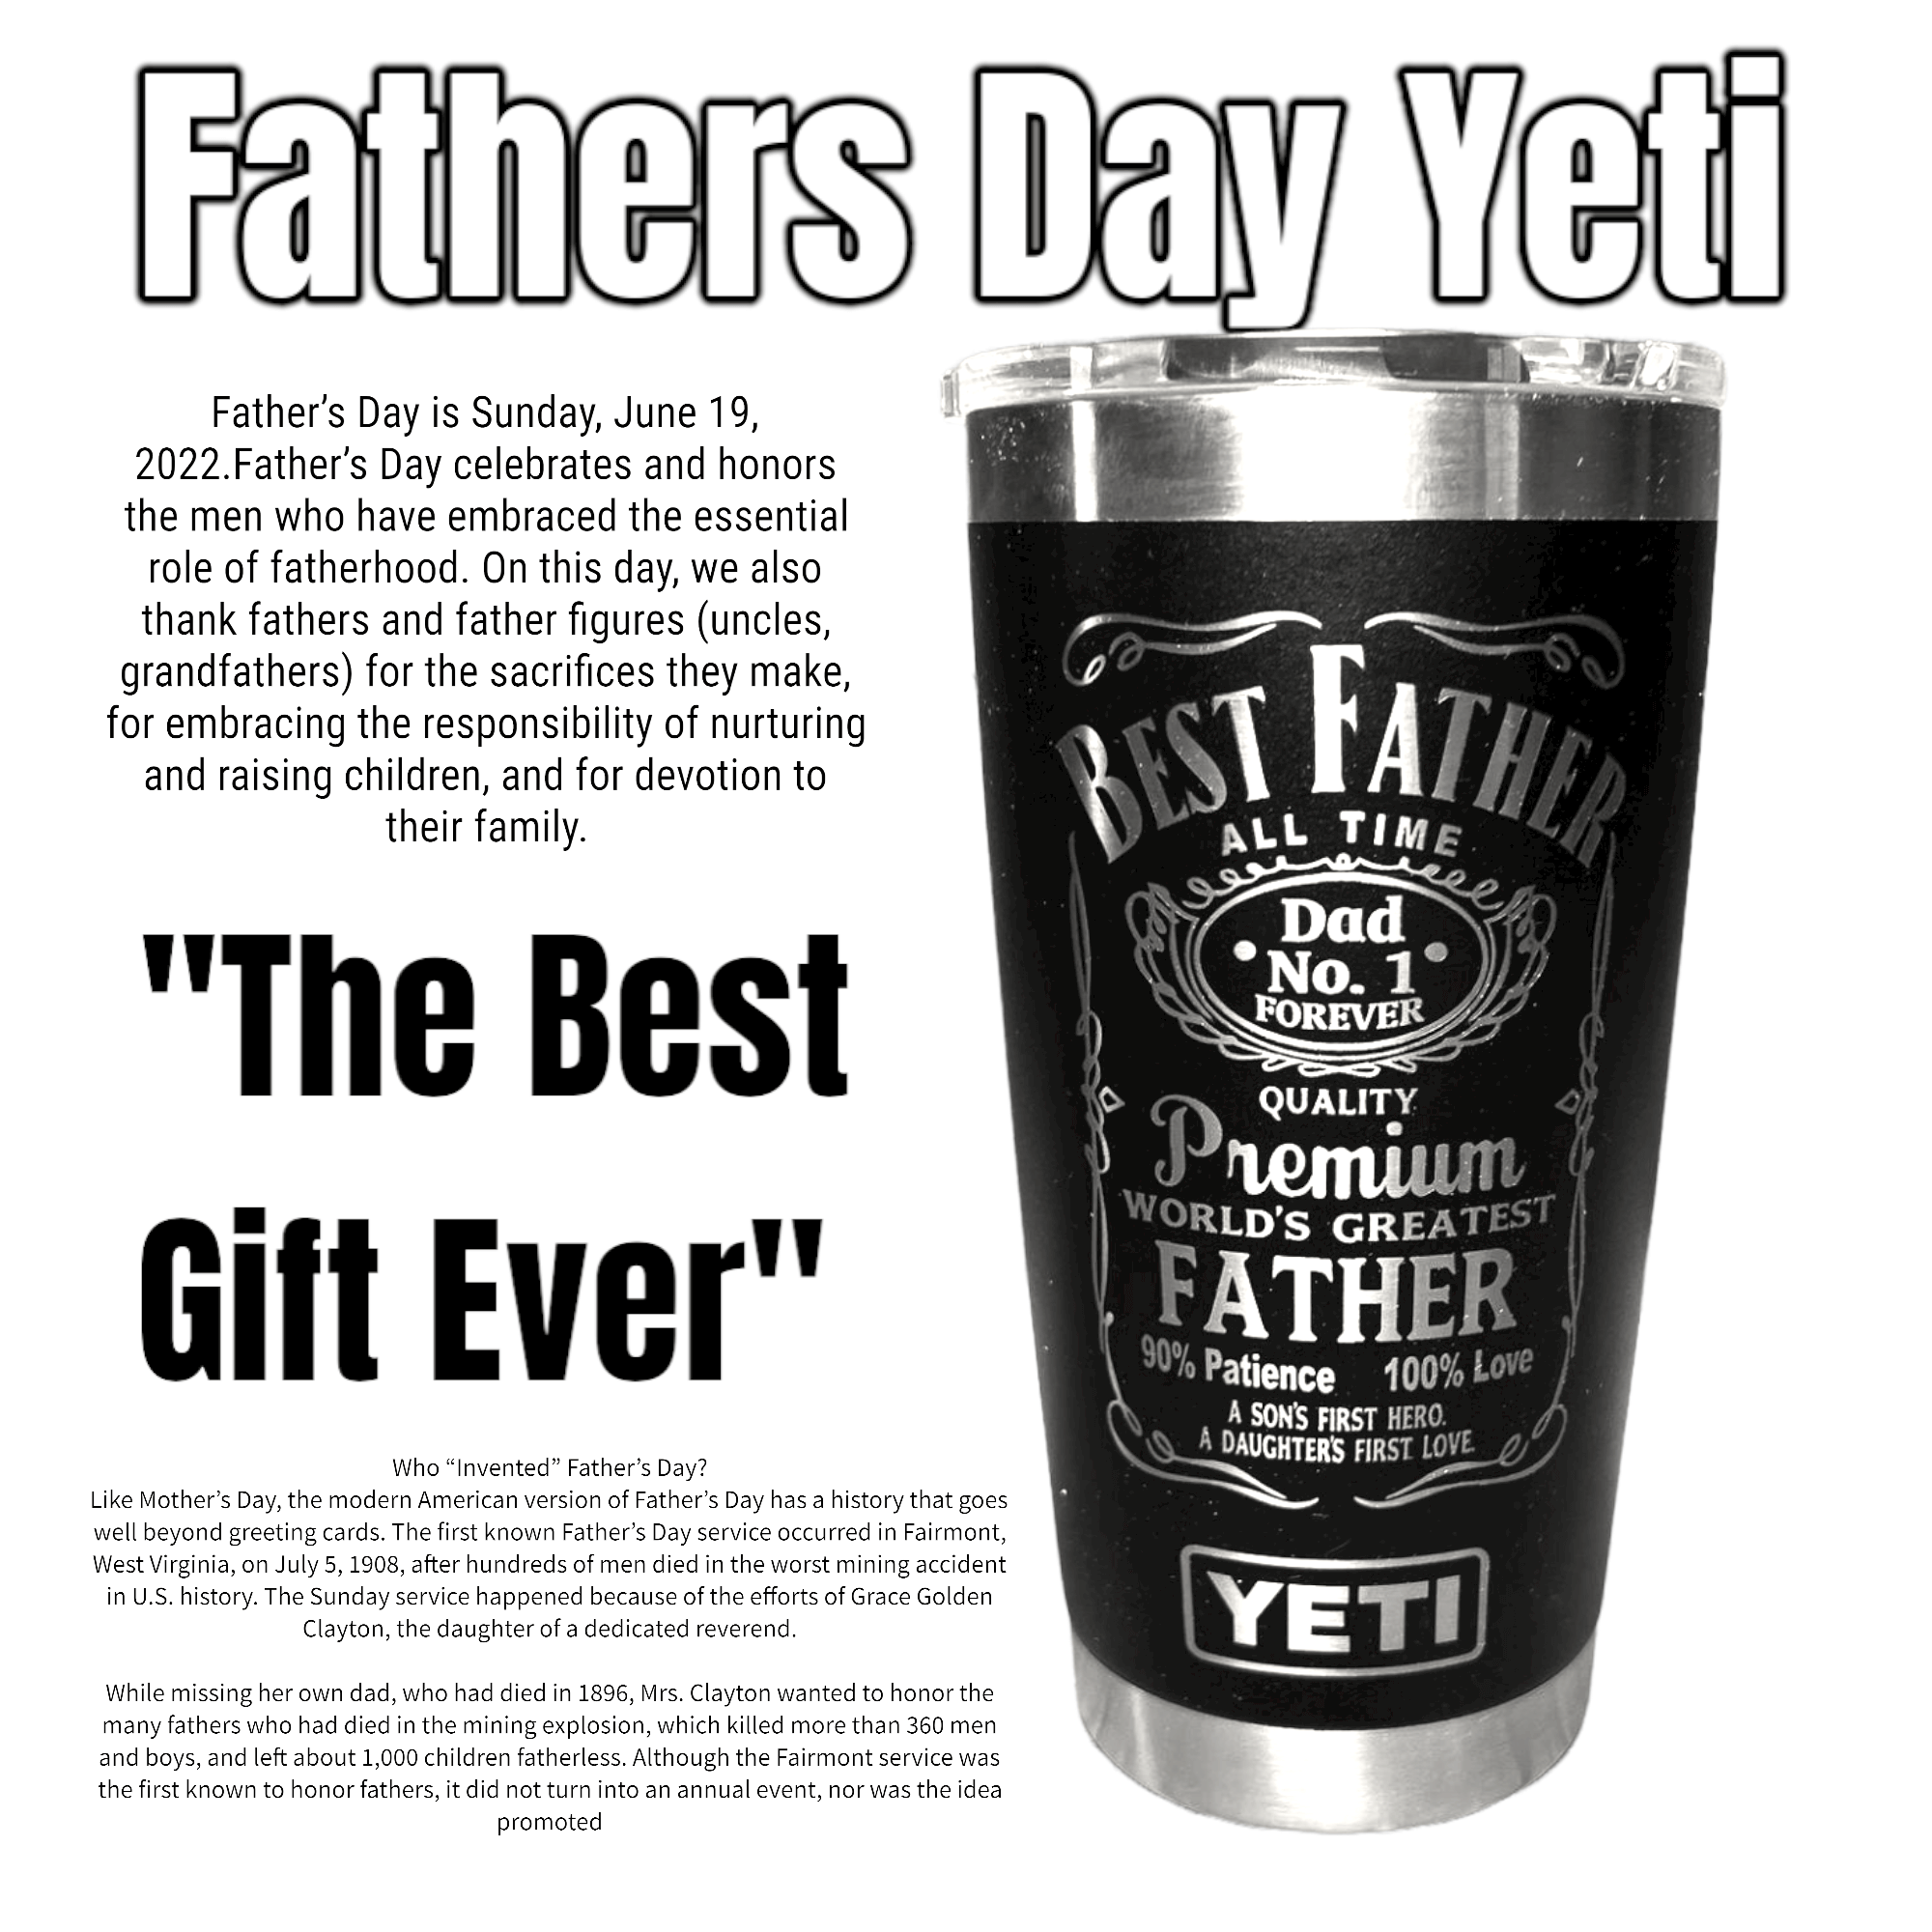 Best Father graphic laser engraved - silver on black Yeti tumbler with Father's Day text in background of photo